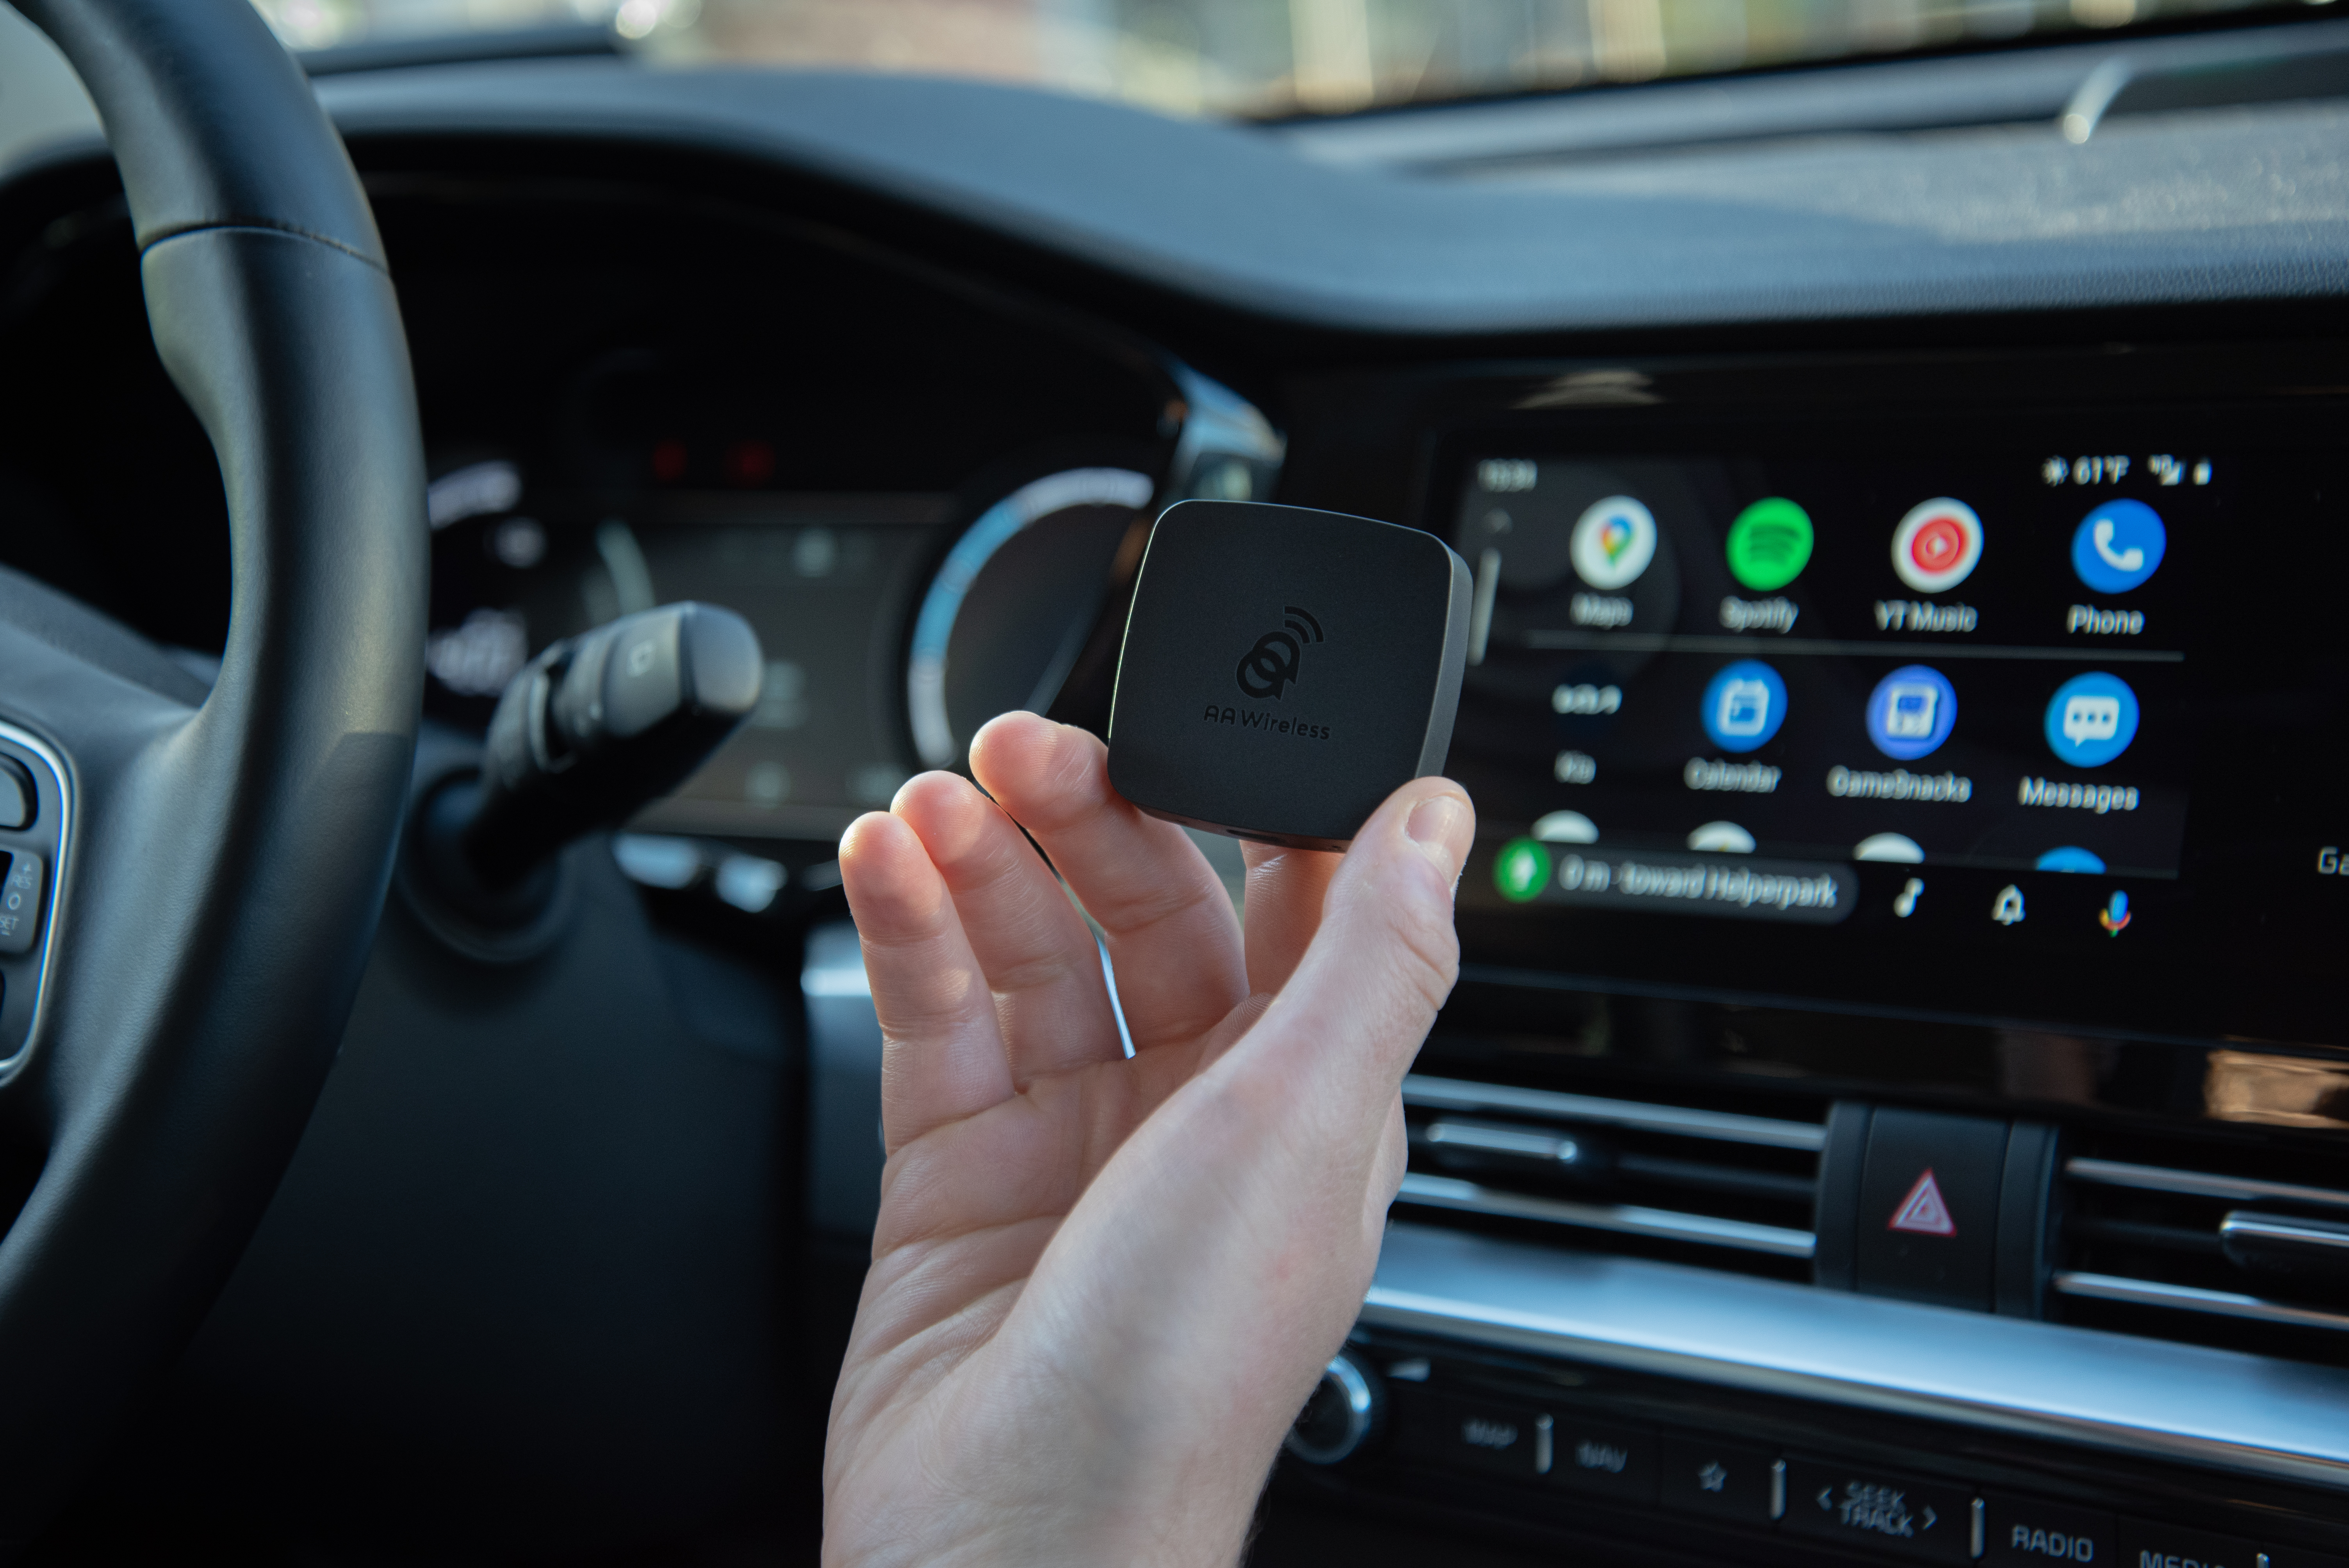 AAWireless converts your Android Auto experience to be wireless